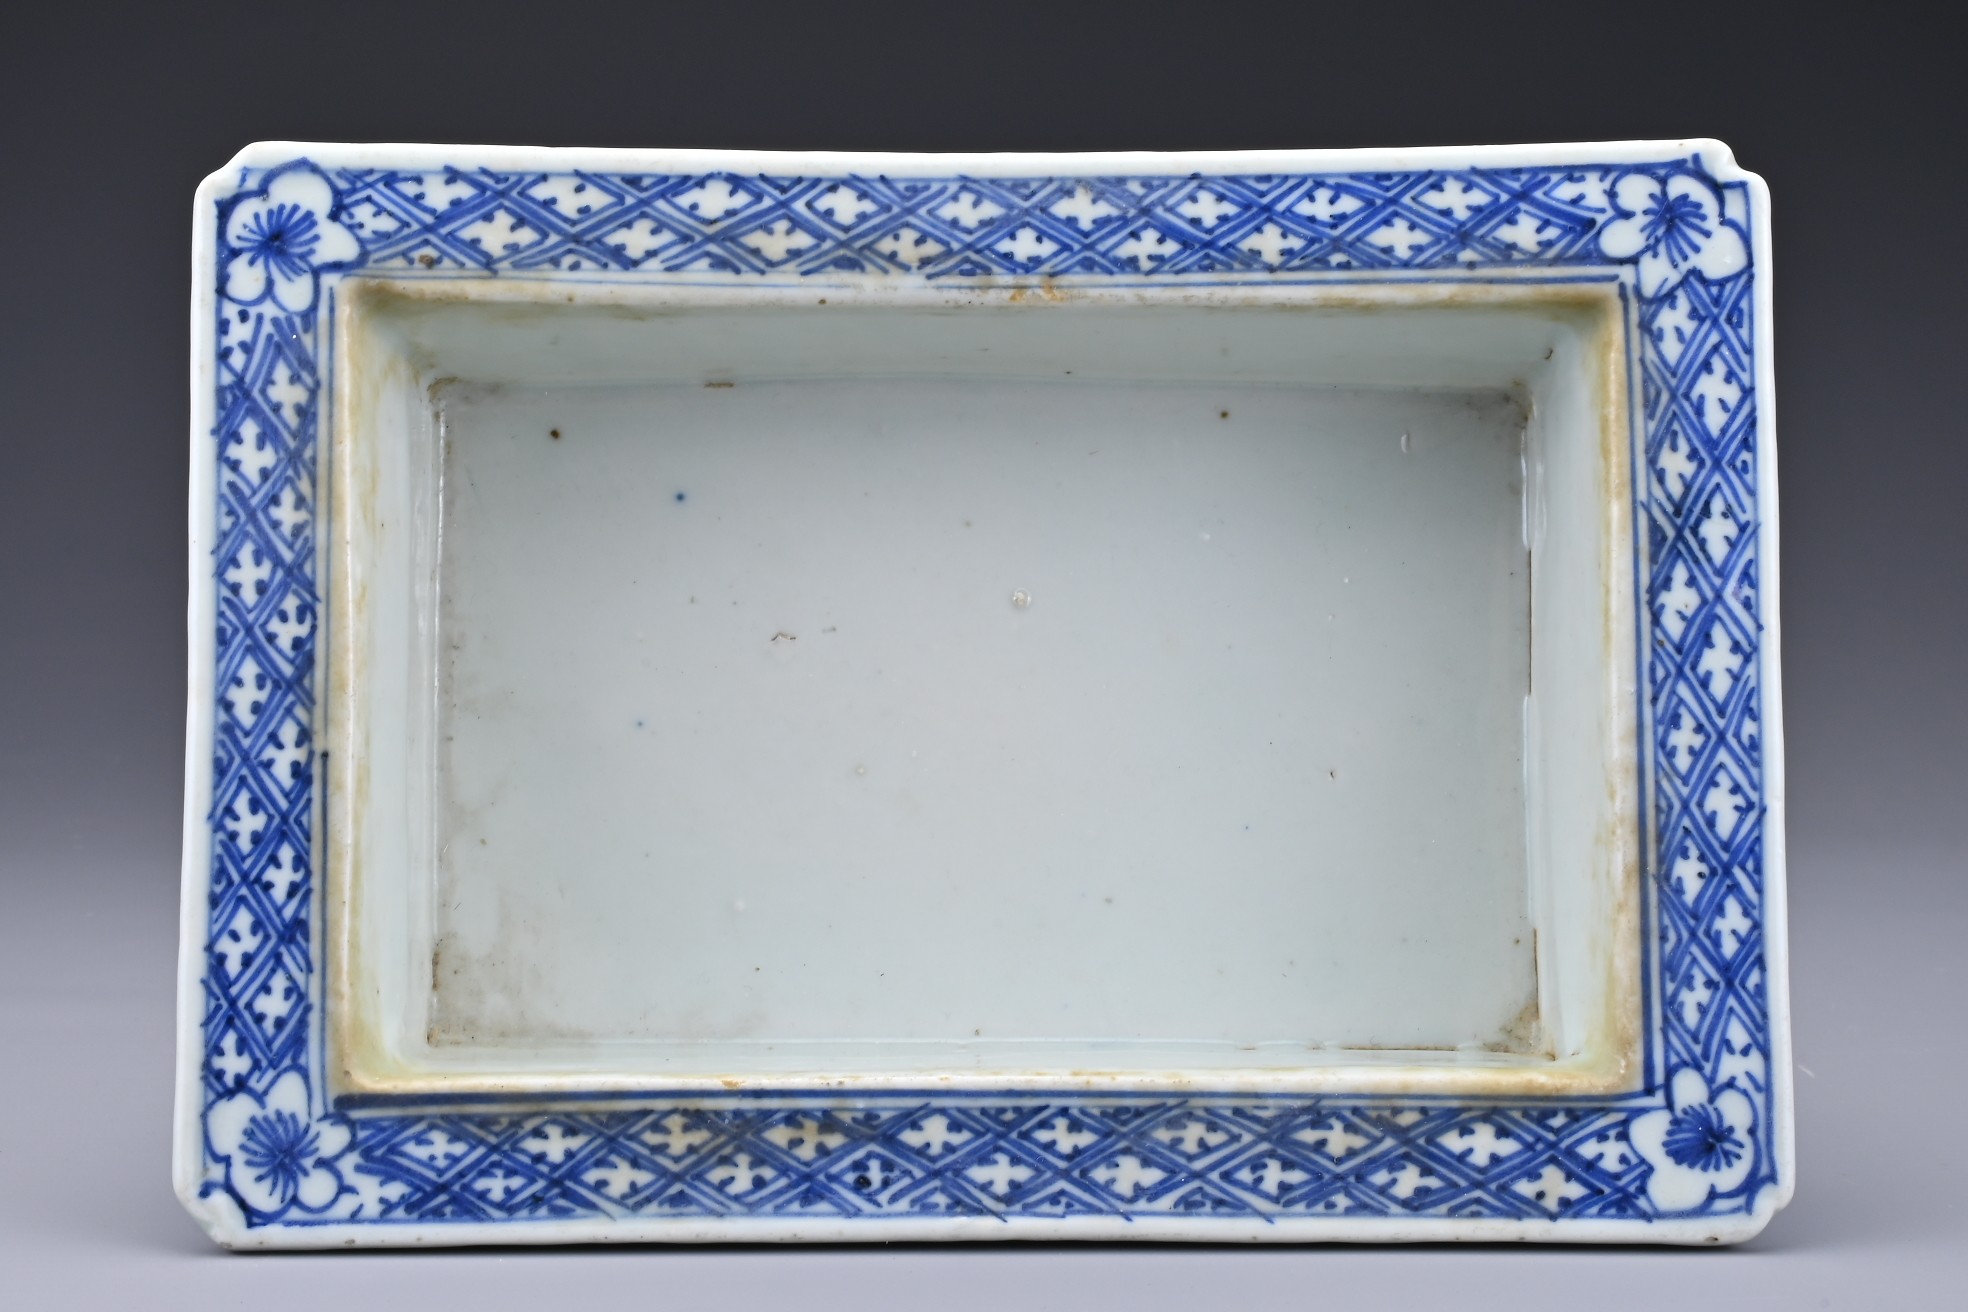 A CHINESE BLUE AND WHITE PORCELAIN NARCISSUS BOWL, 19TH CENTURY. Of rectangular form with outer - Image 4 of 5